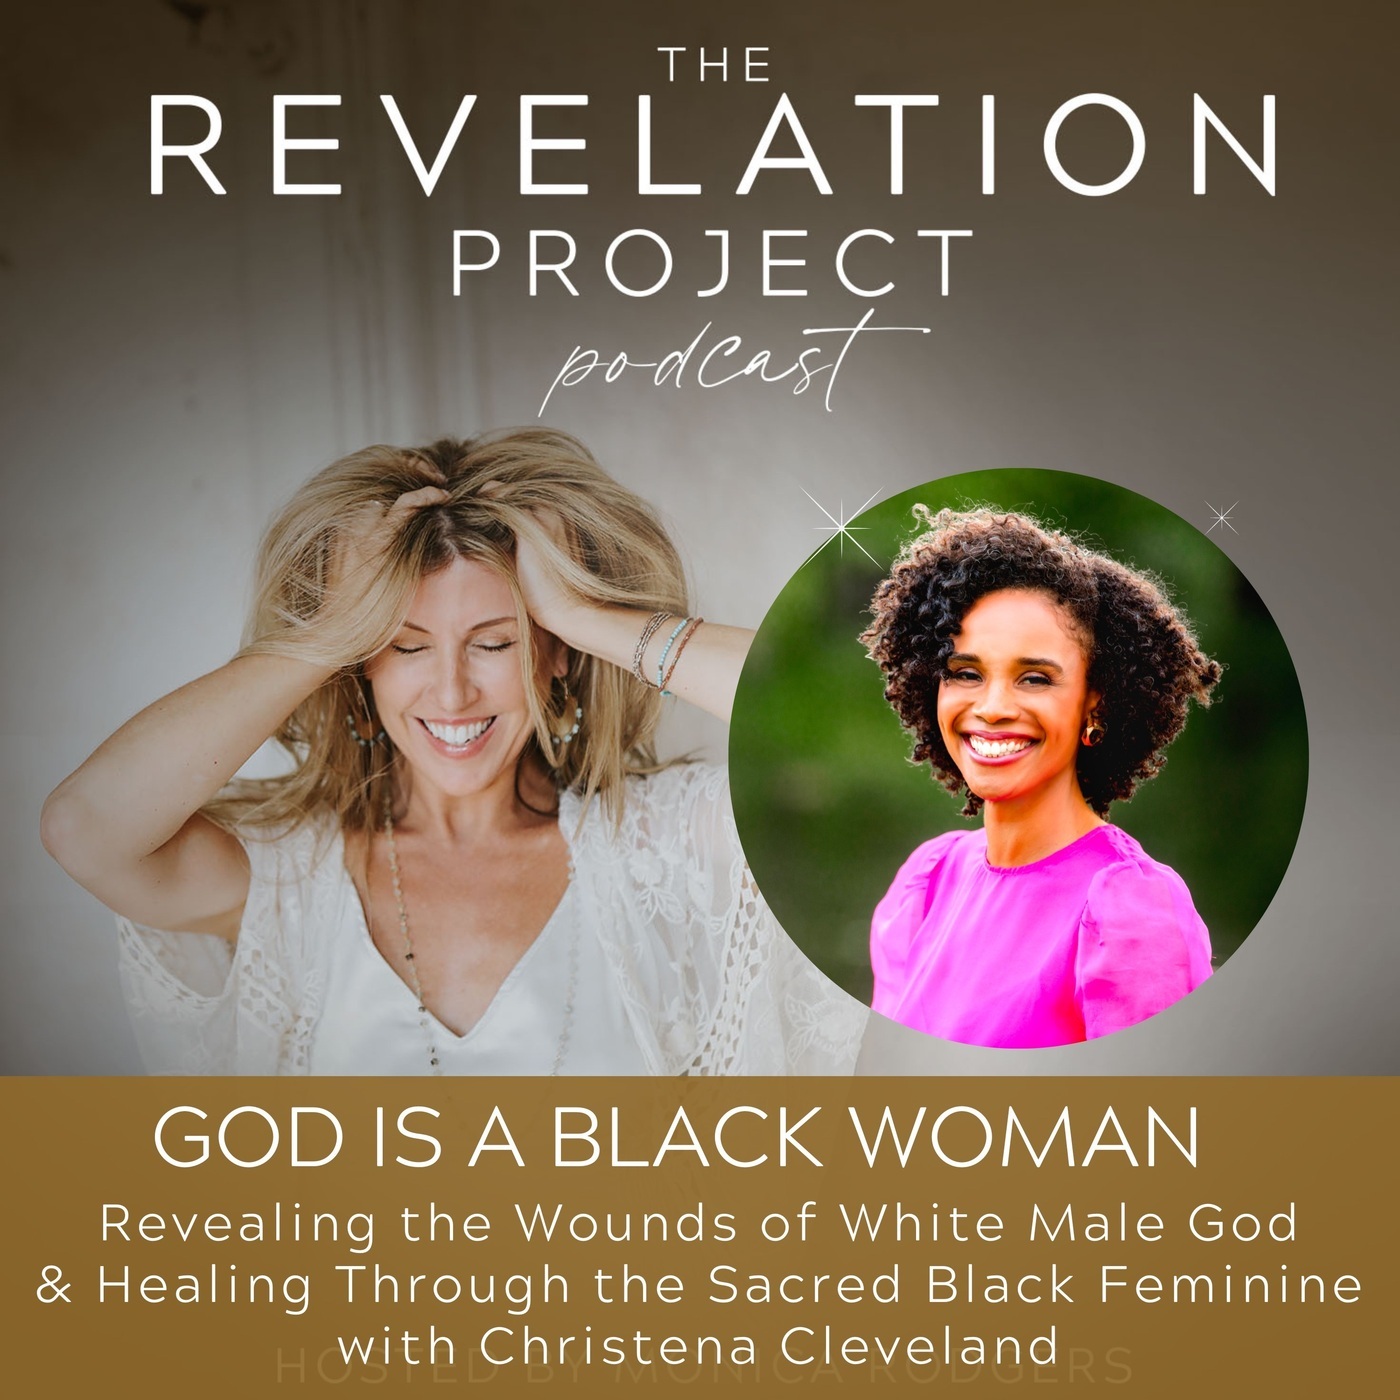 The Revelation Project 152: Dr. Christena Cleveland - God is a Black Woman